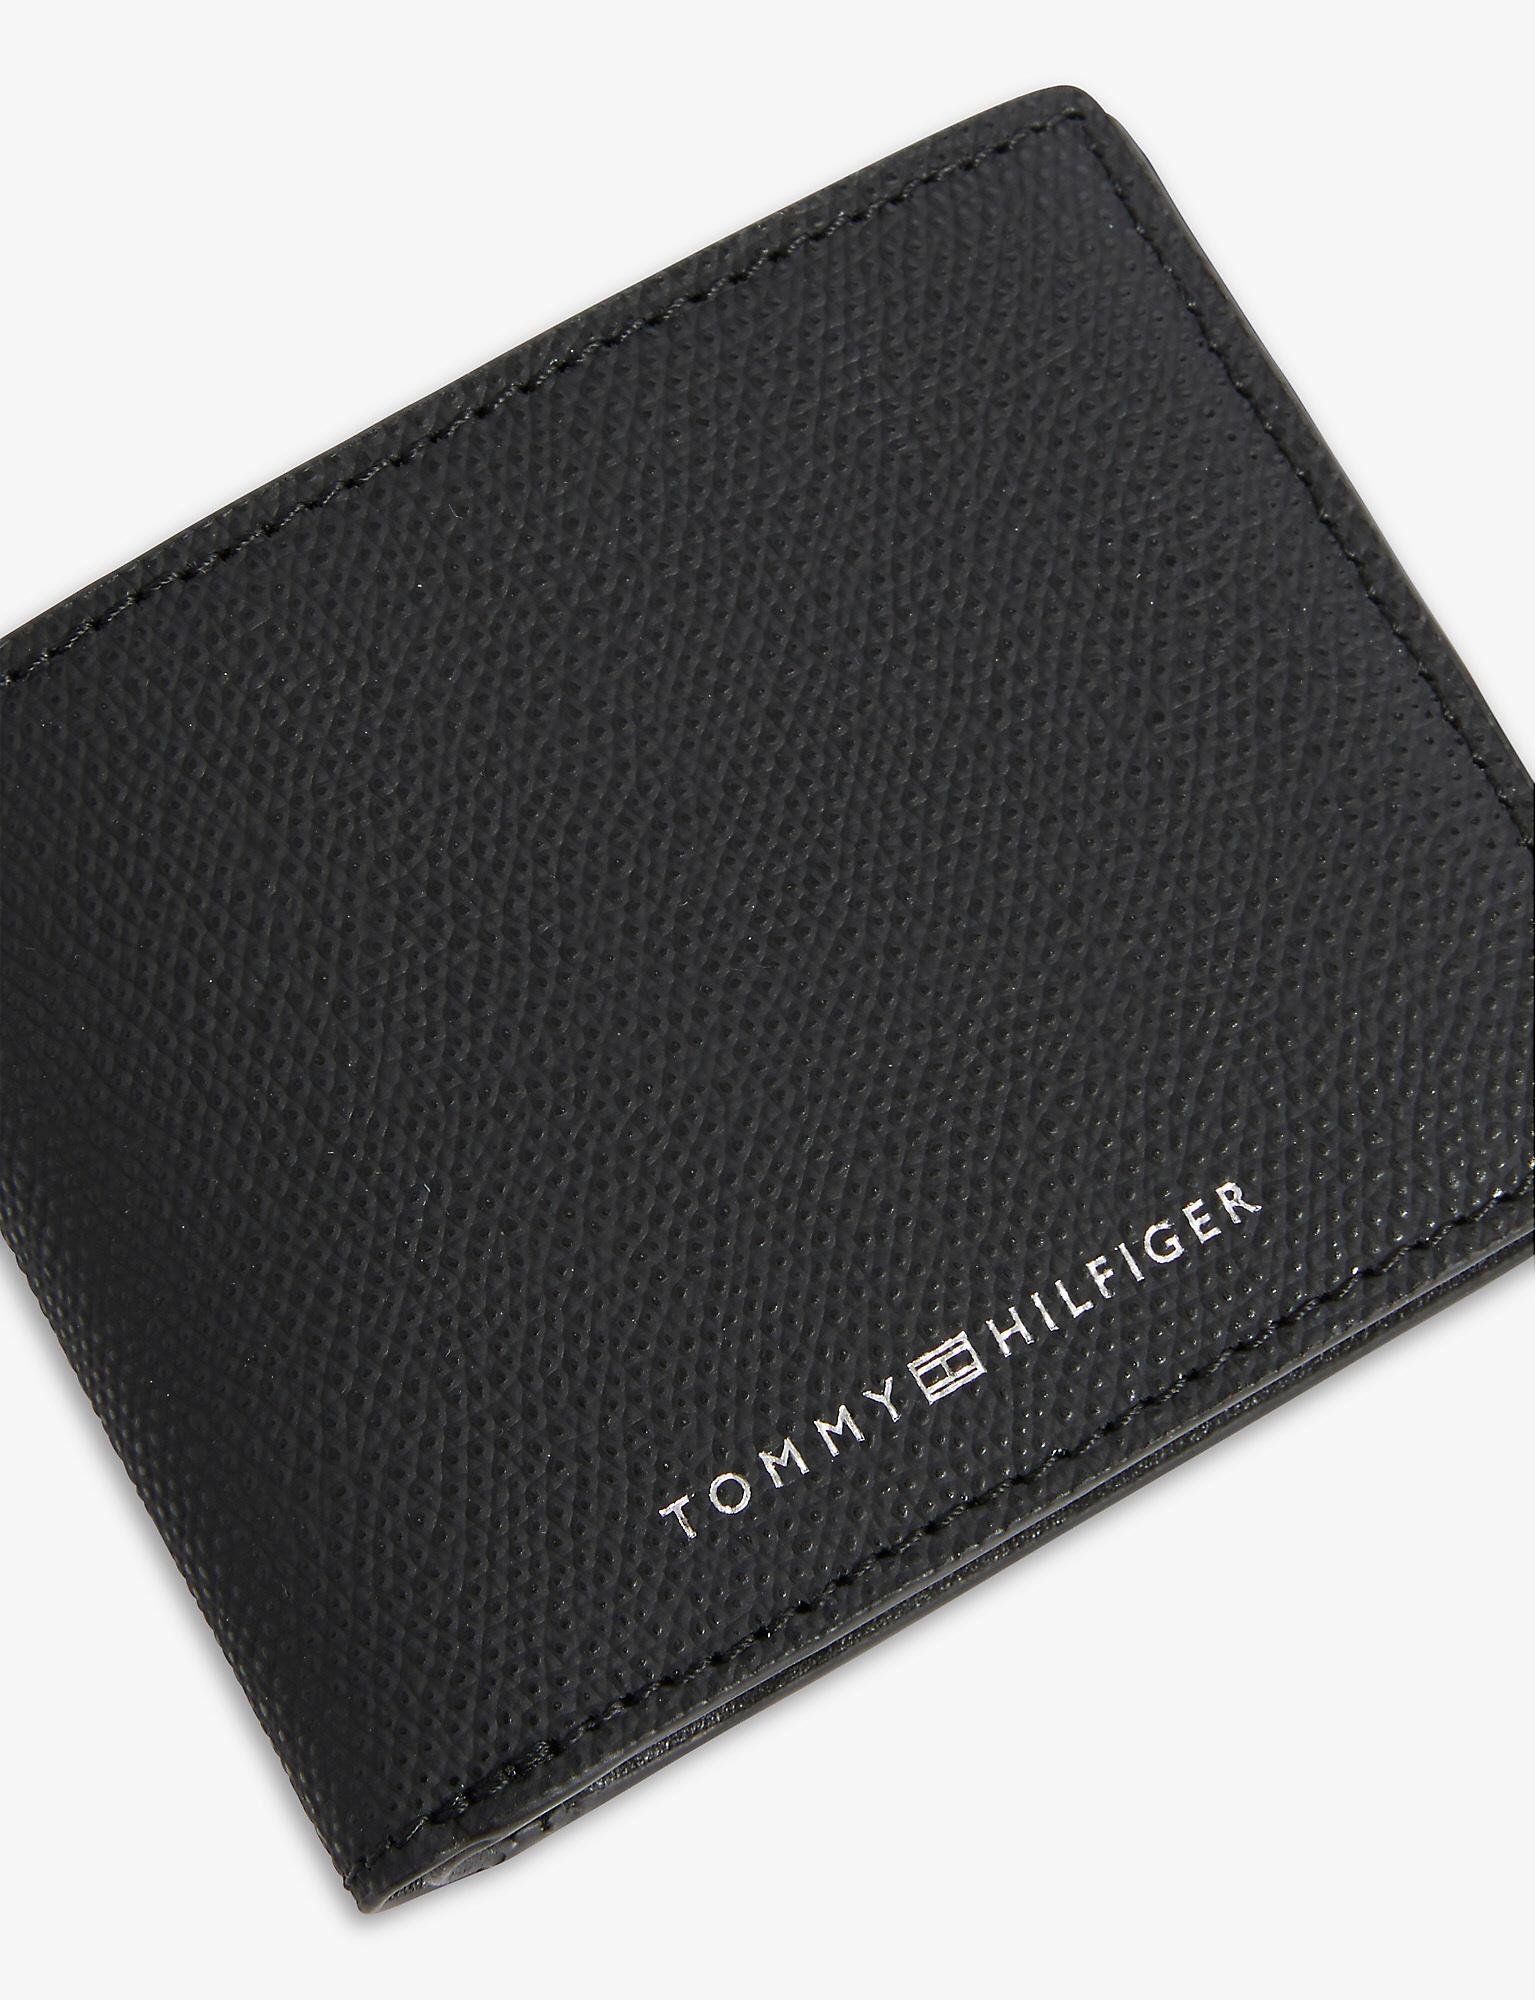 Tommy Hilfiger embossed-logo Calf Leather Wallet - Farfetch